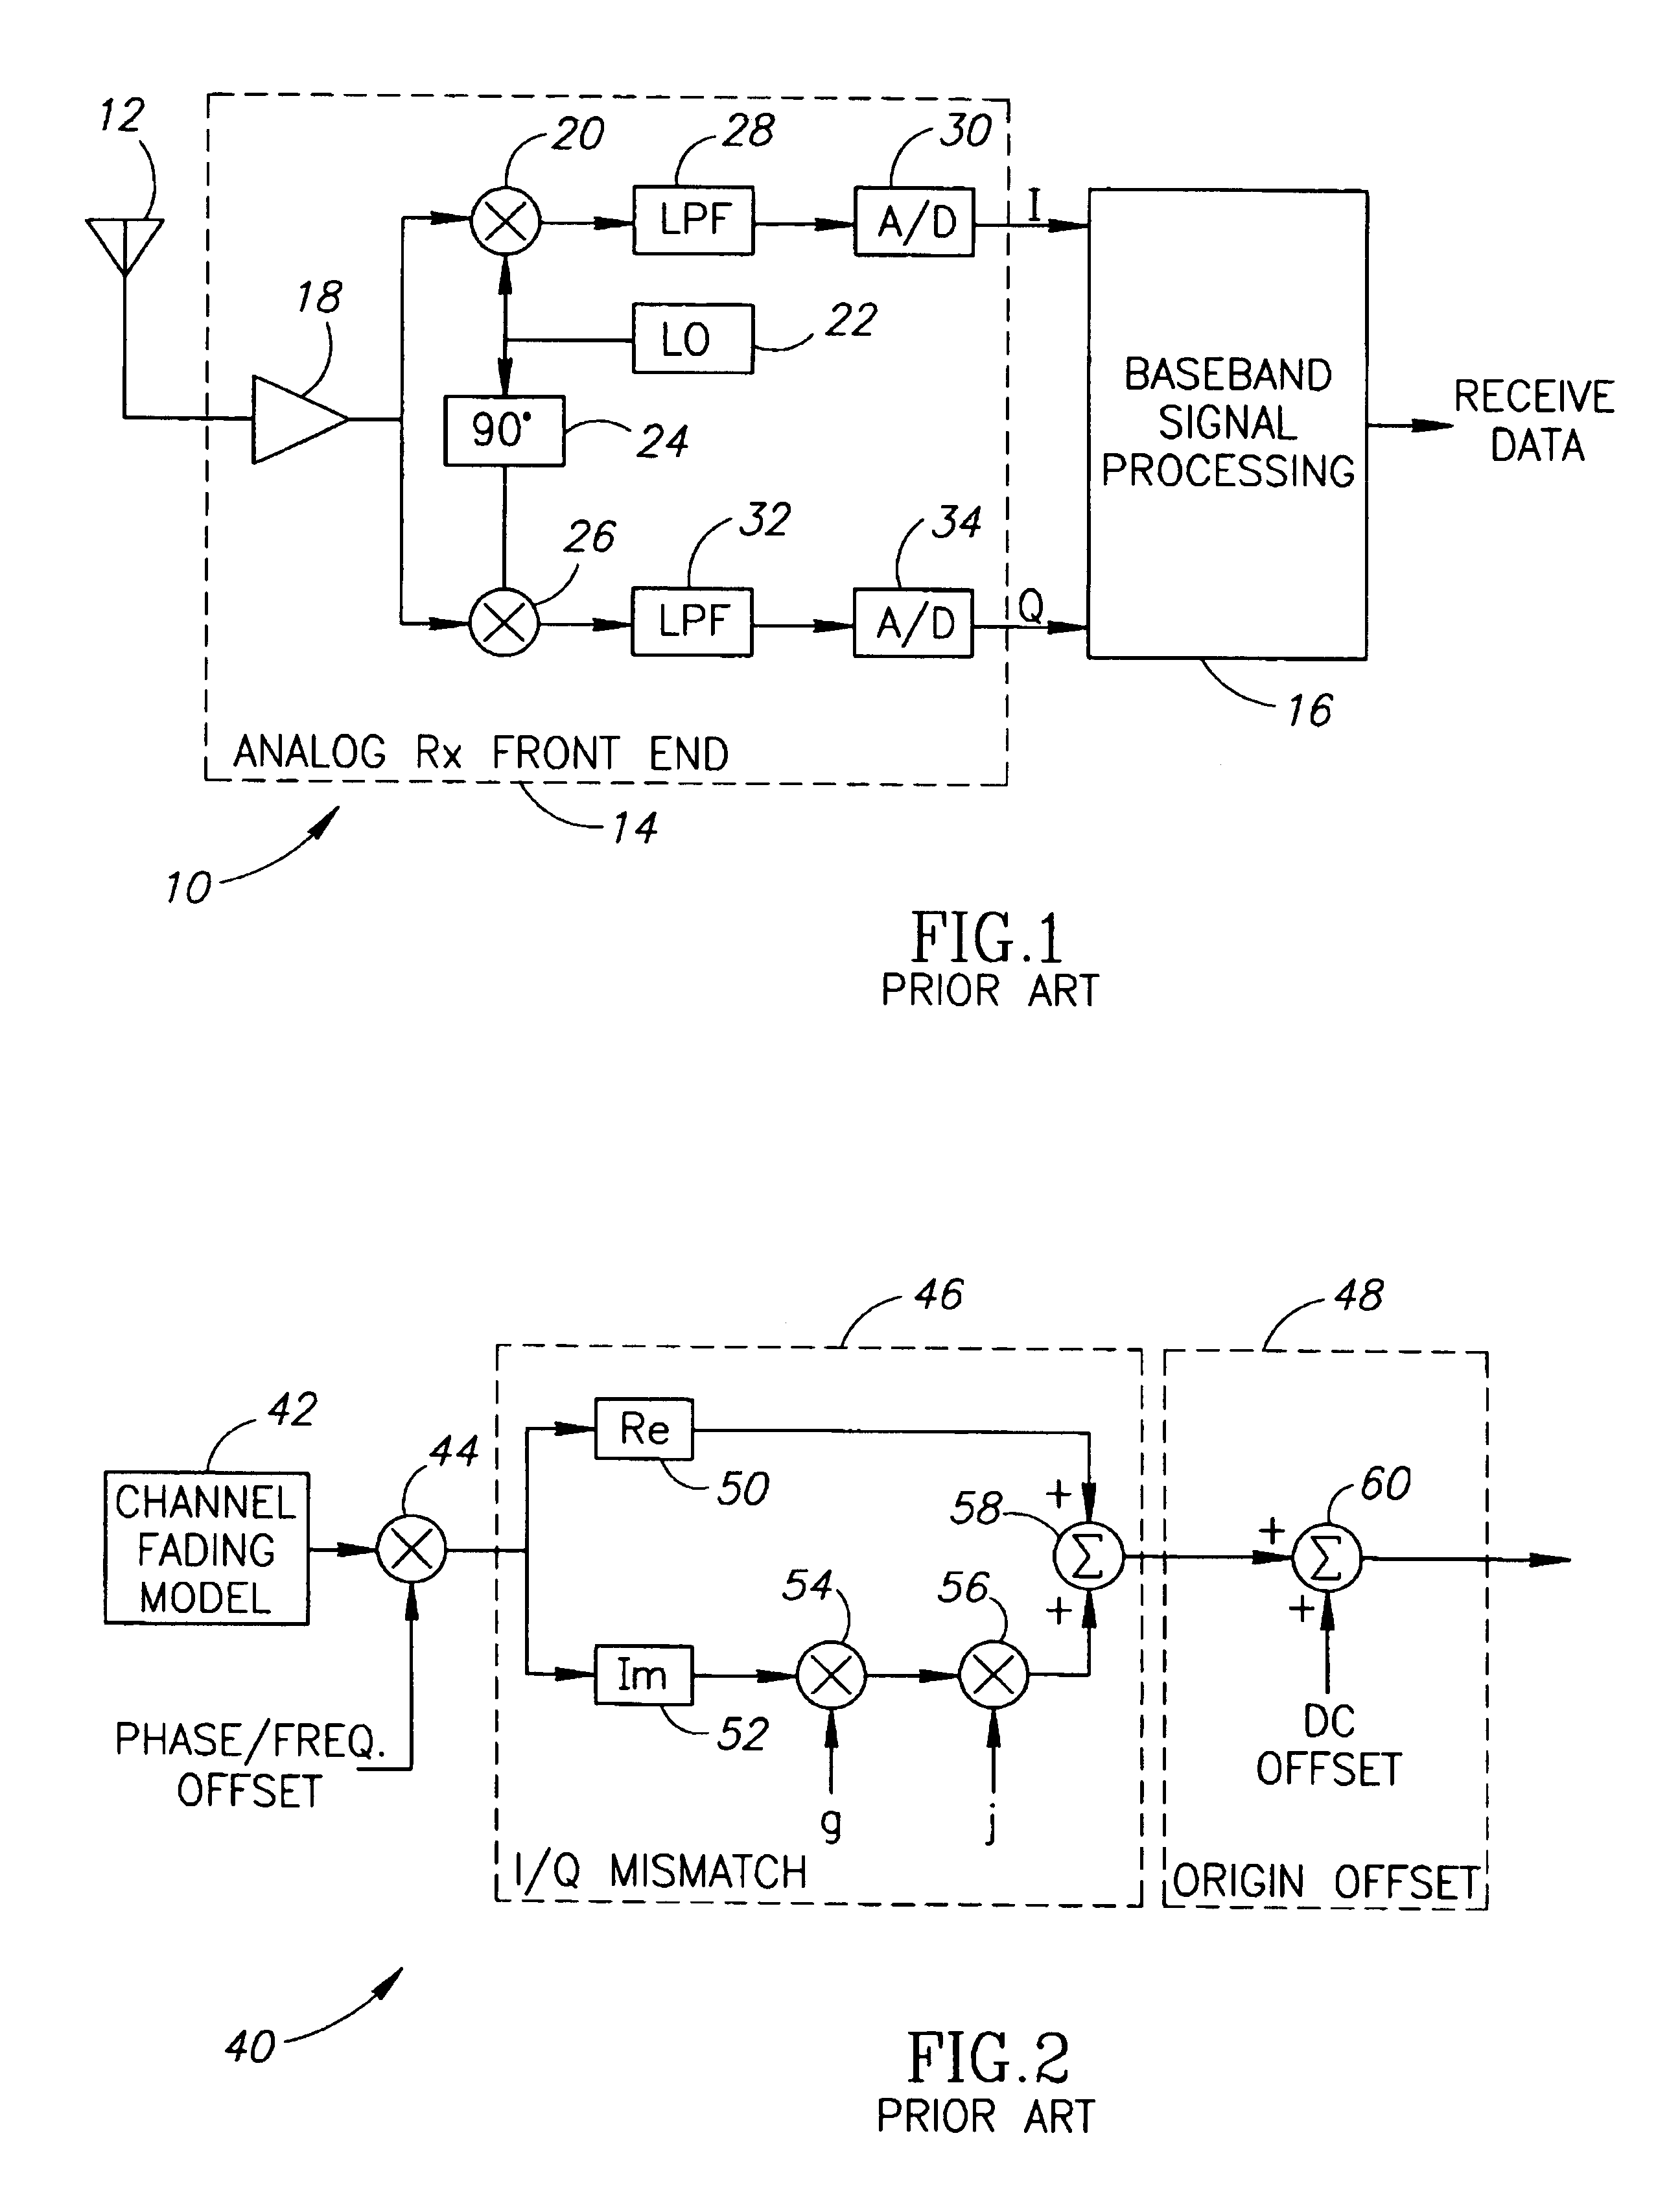 Compensation of I/Q gain mismatch in a communications receiver